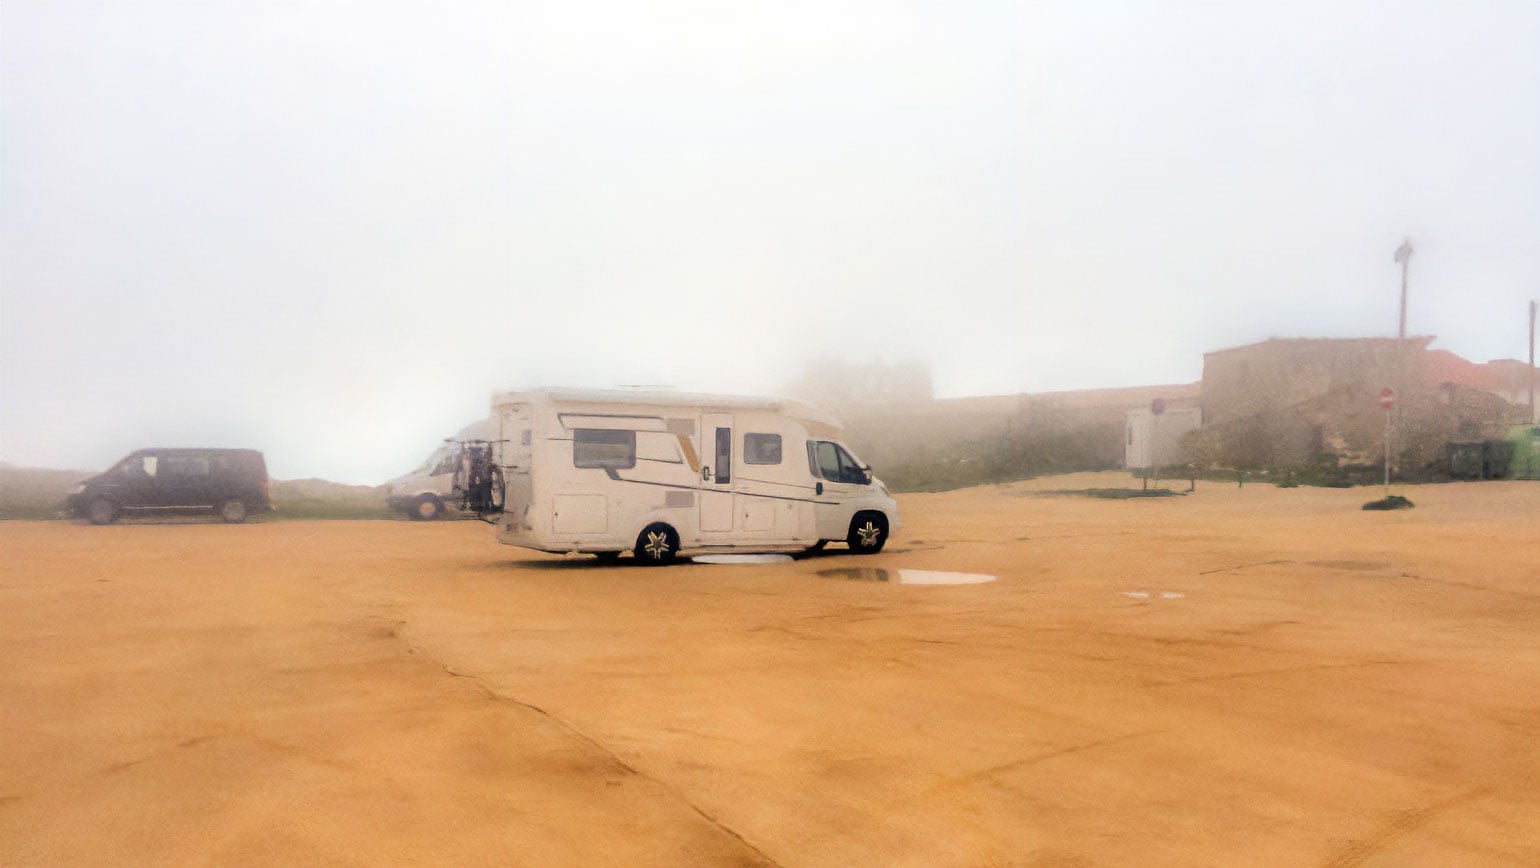 our motorhome parked in the carpark of Cabo Espichel which is sandy and engulfed in fog 